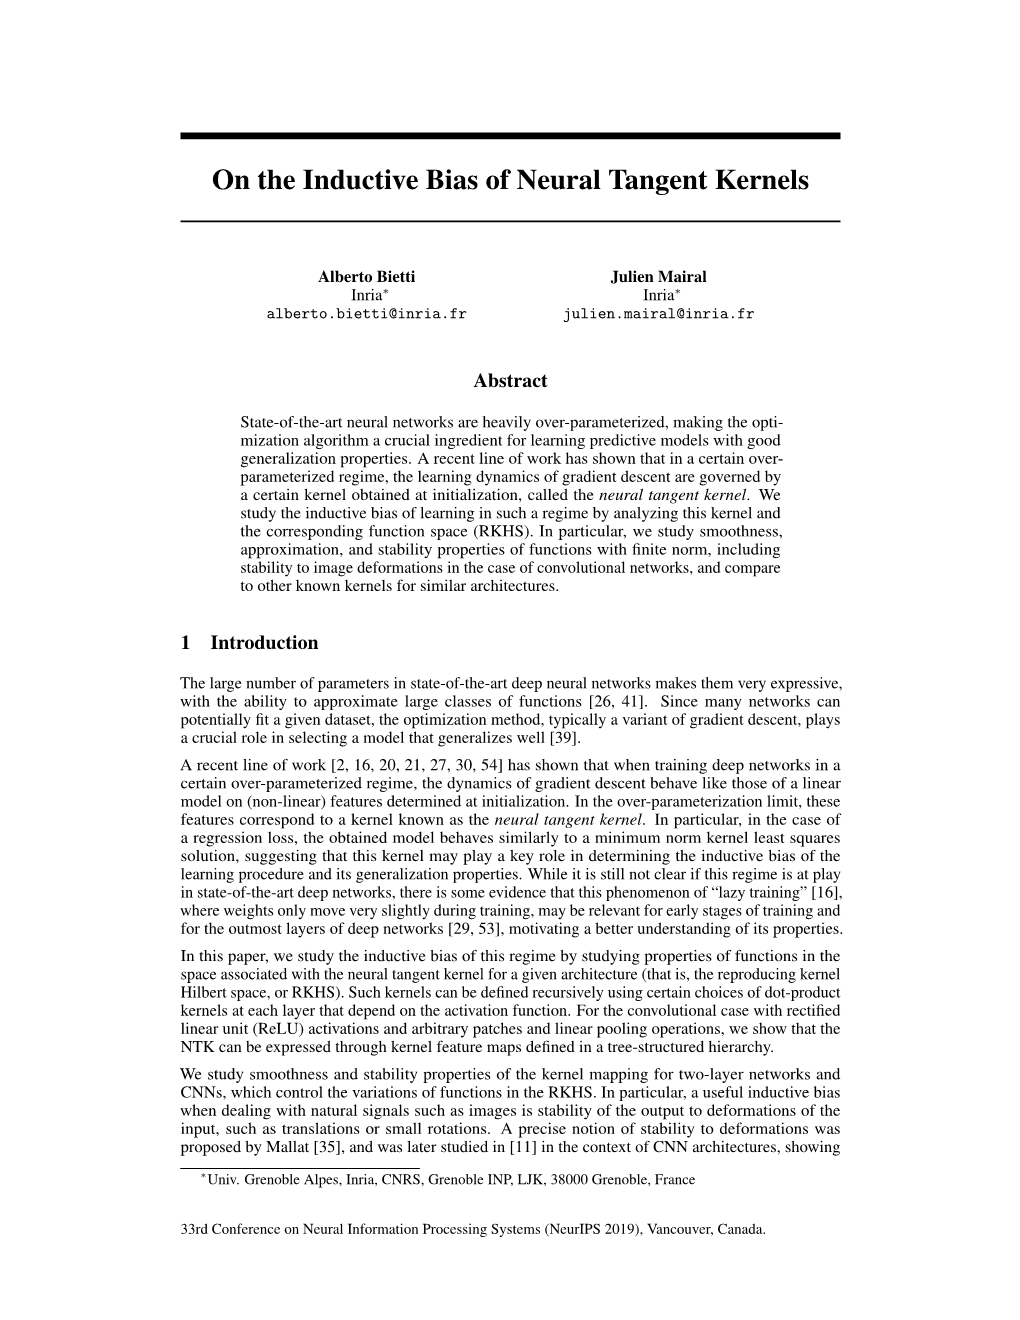 On the Inductive Bias of Neural Tangent Kernels